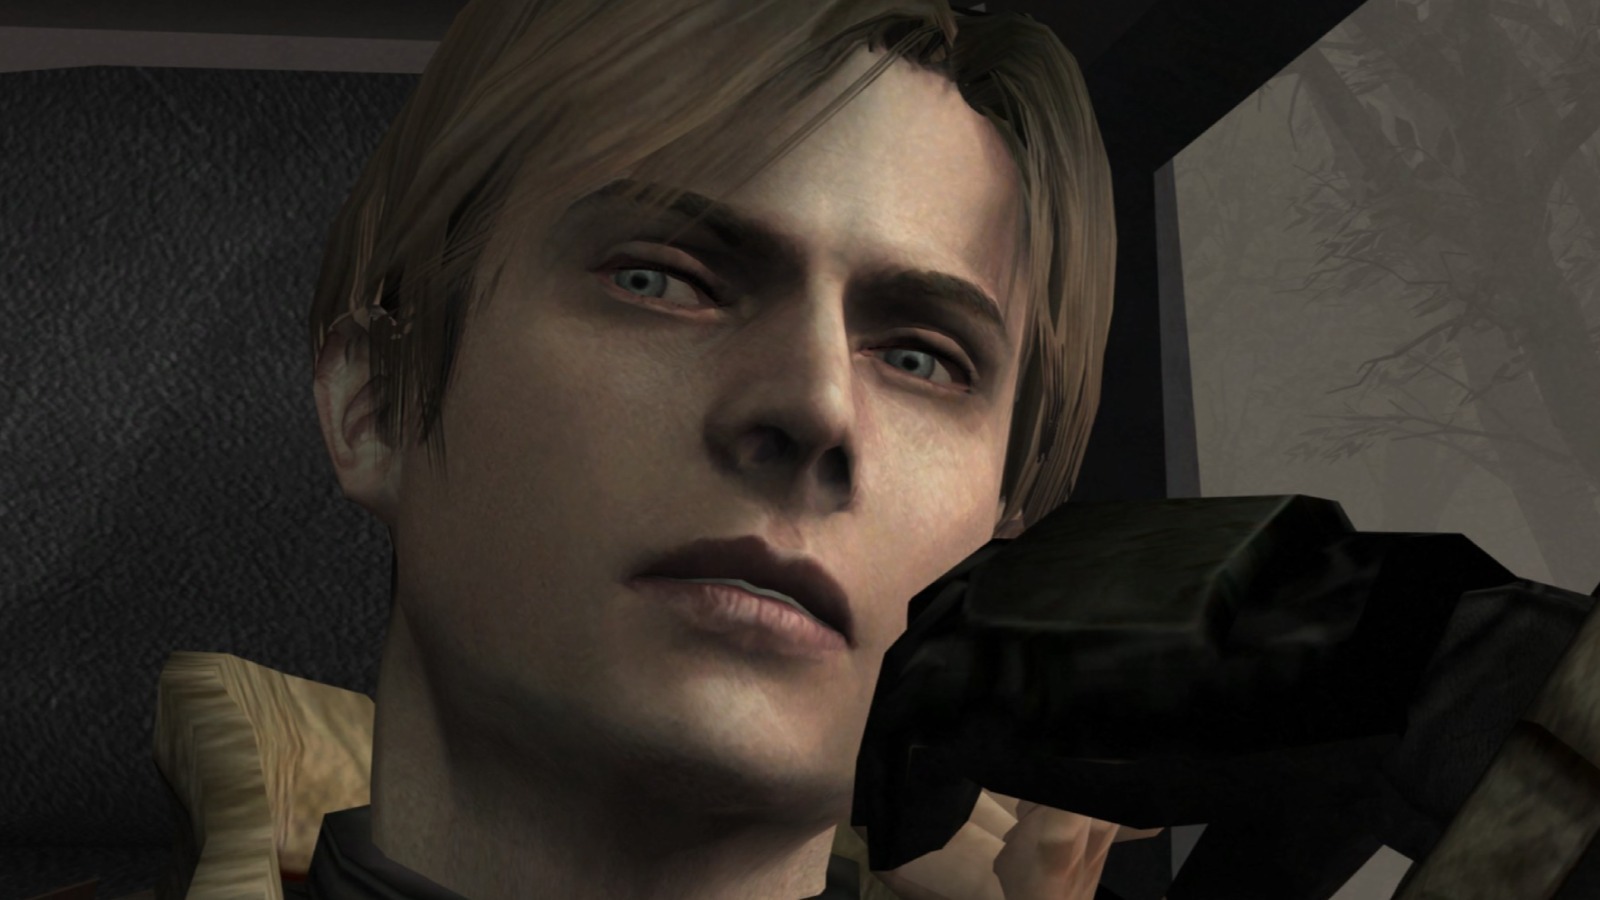 Analyzing The Mobile Version of Resident Evil 4 